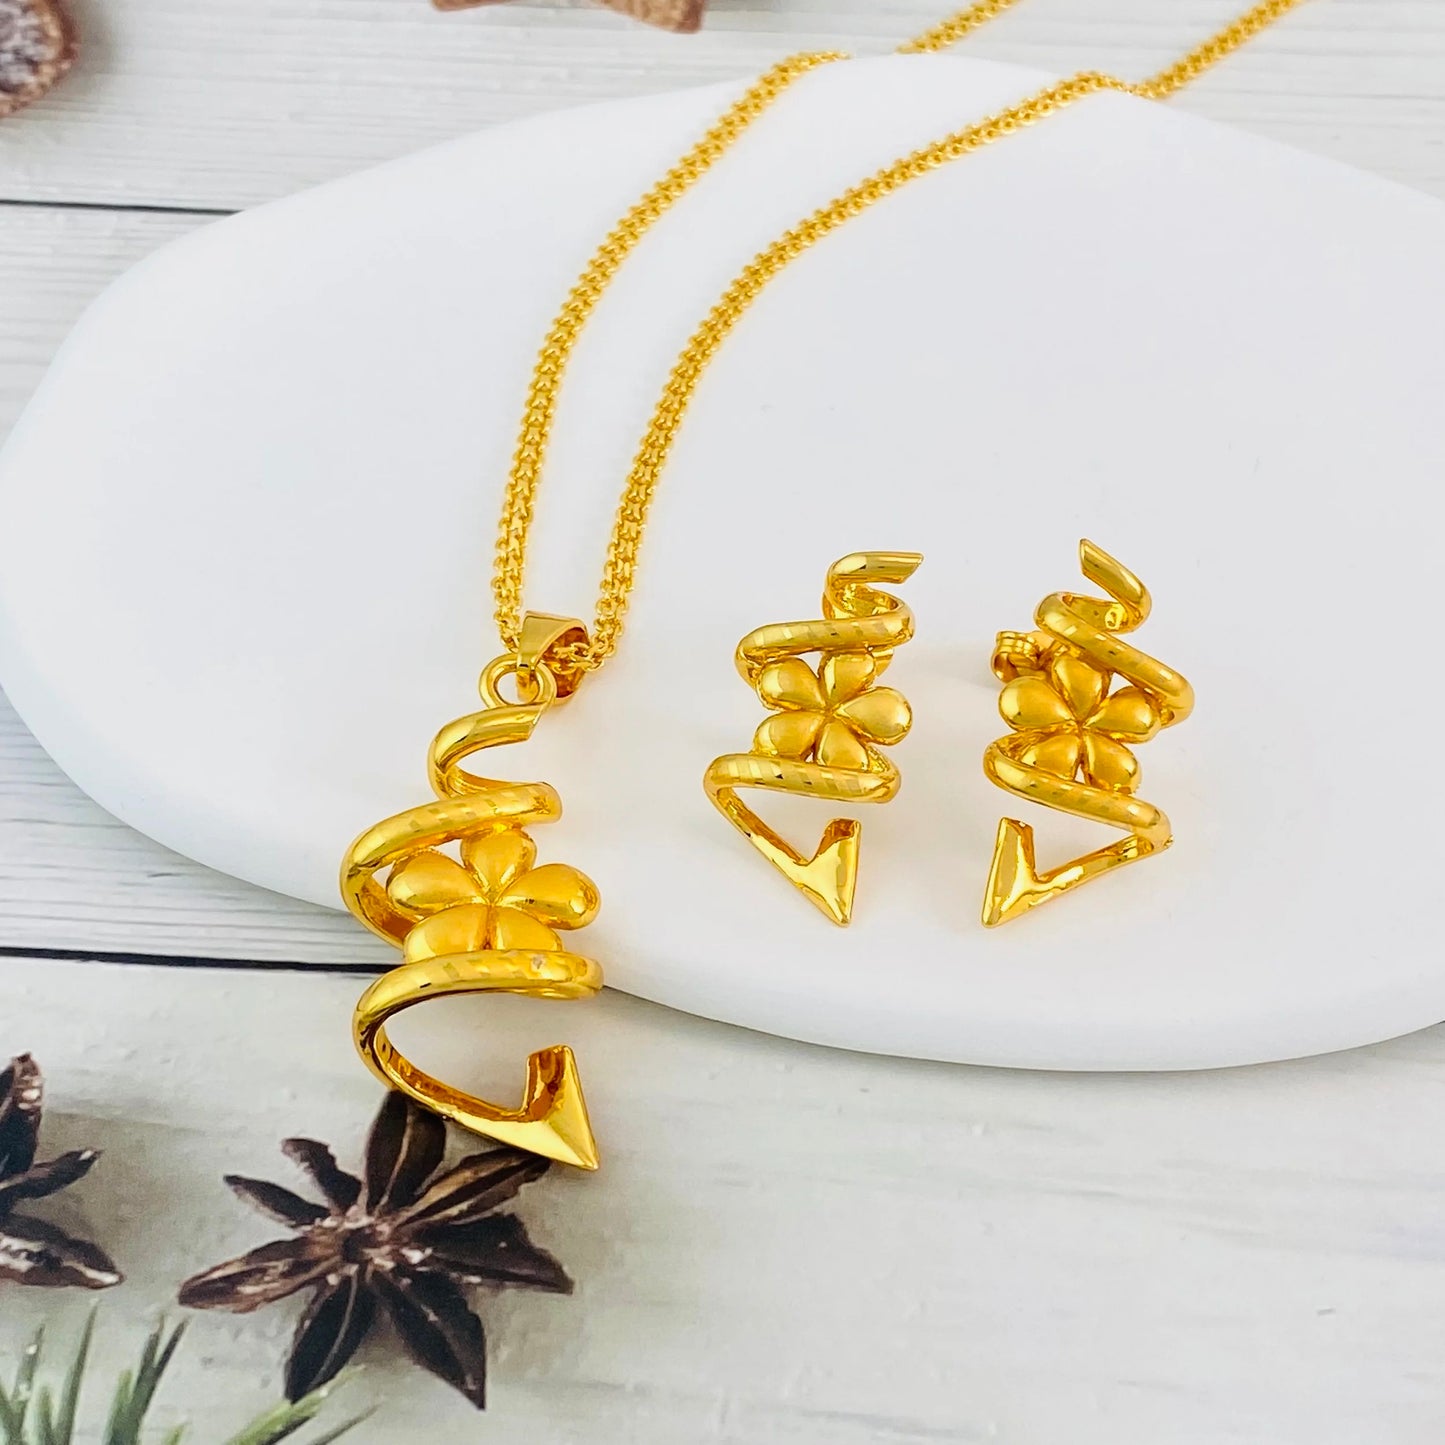 Simple and stunning jewelry sets